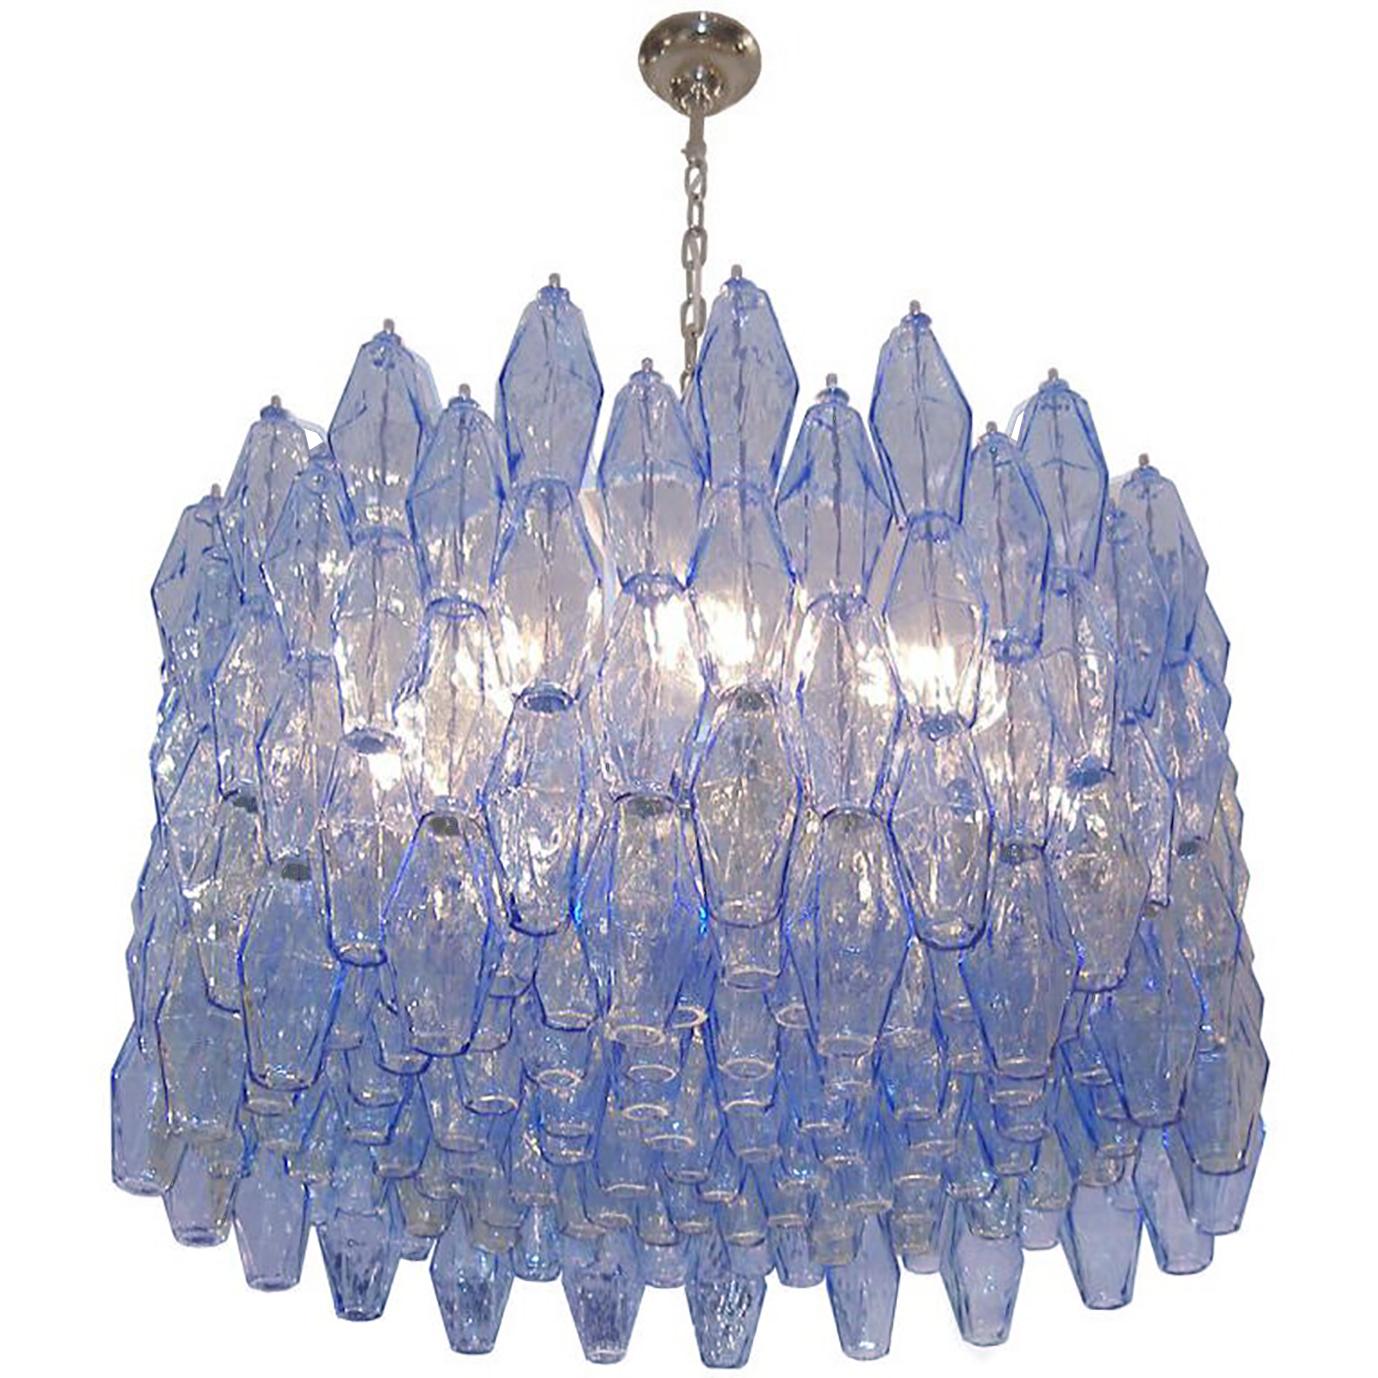 A blue polyhedral glass chandelier with chrome canopy and chain.